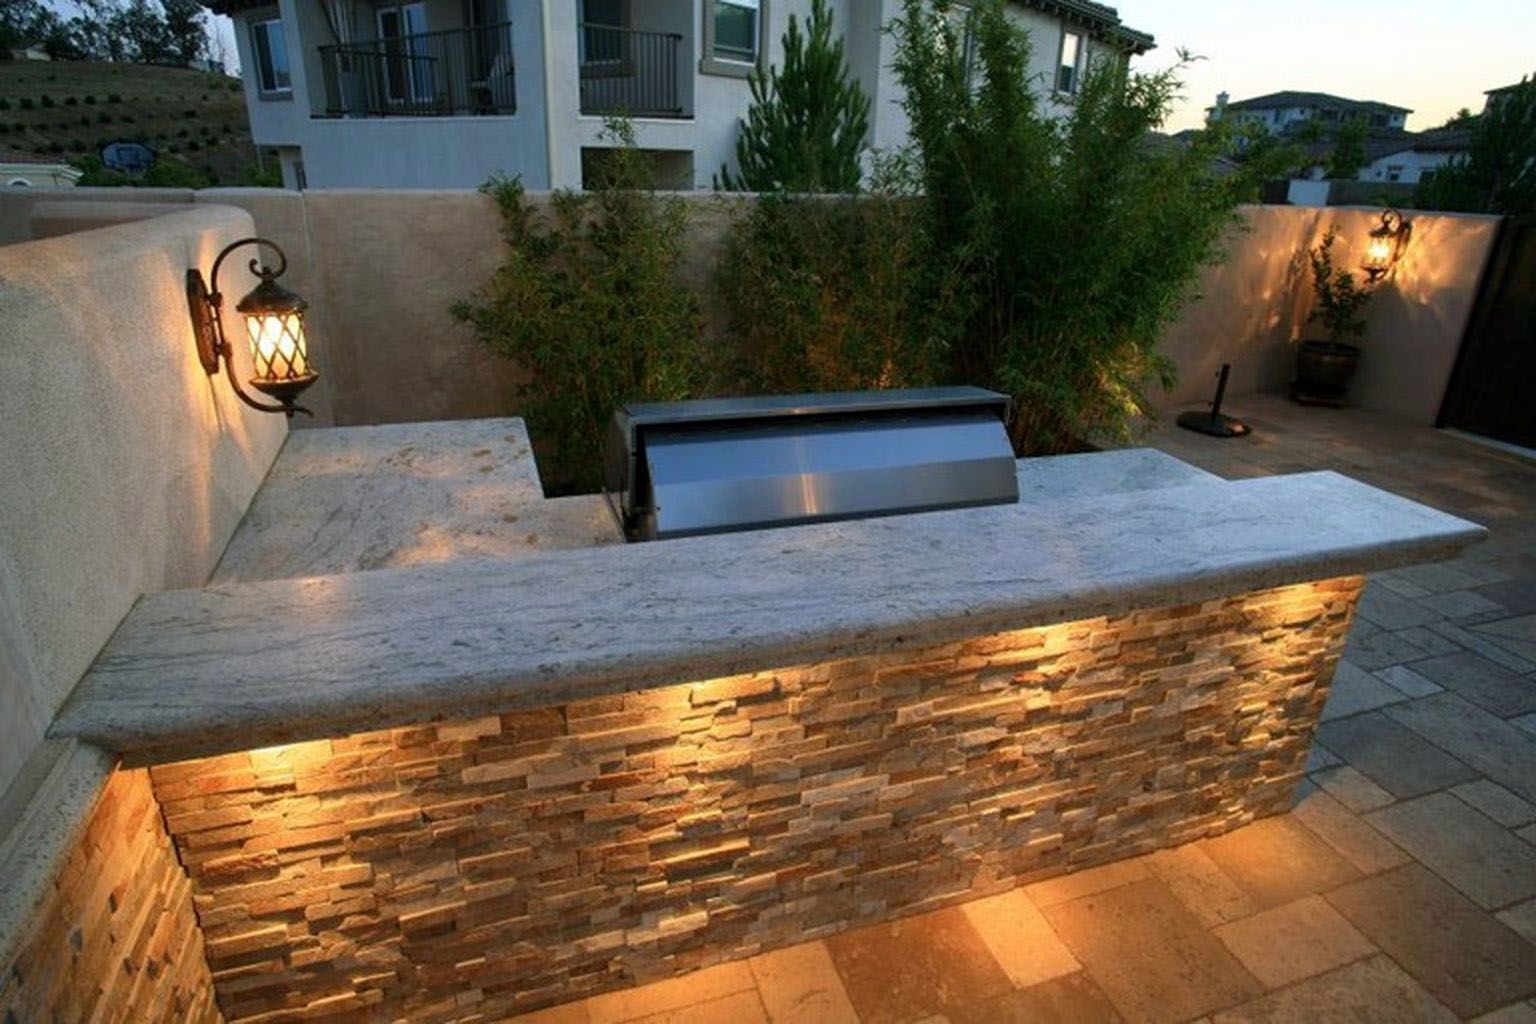 The Best Materials For An Outdoor Kitchen